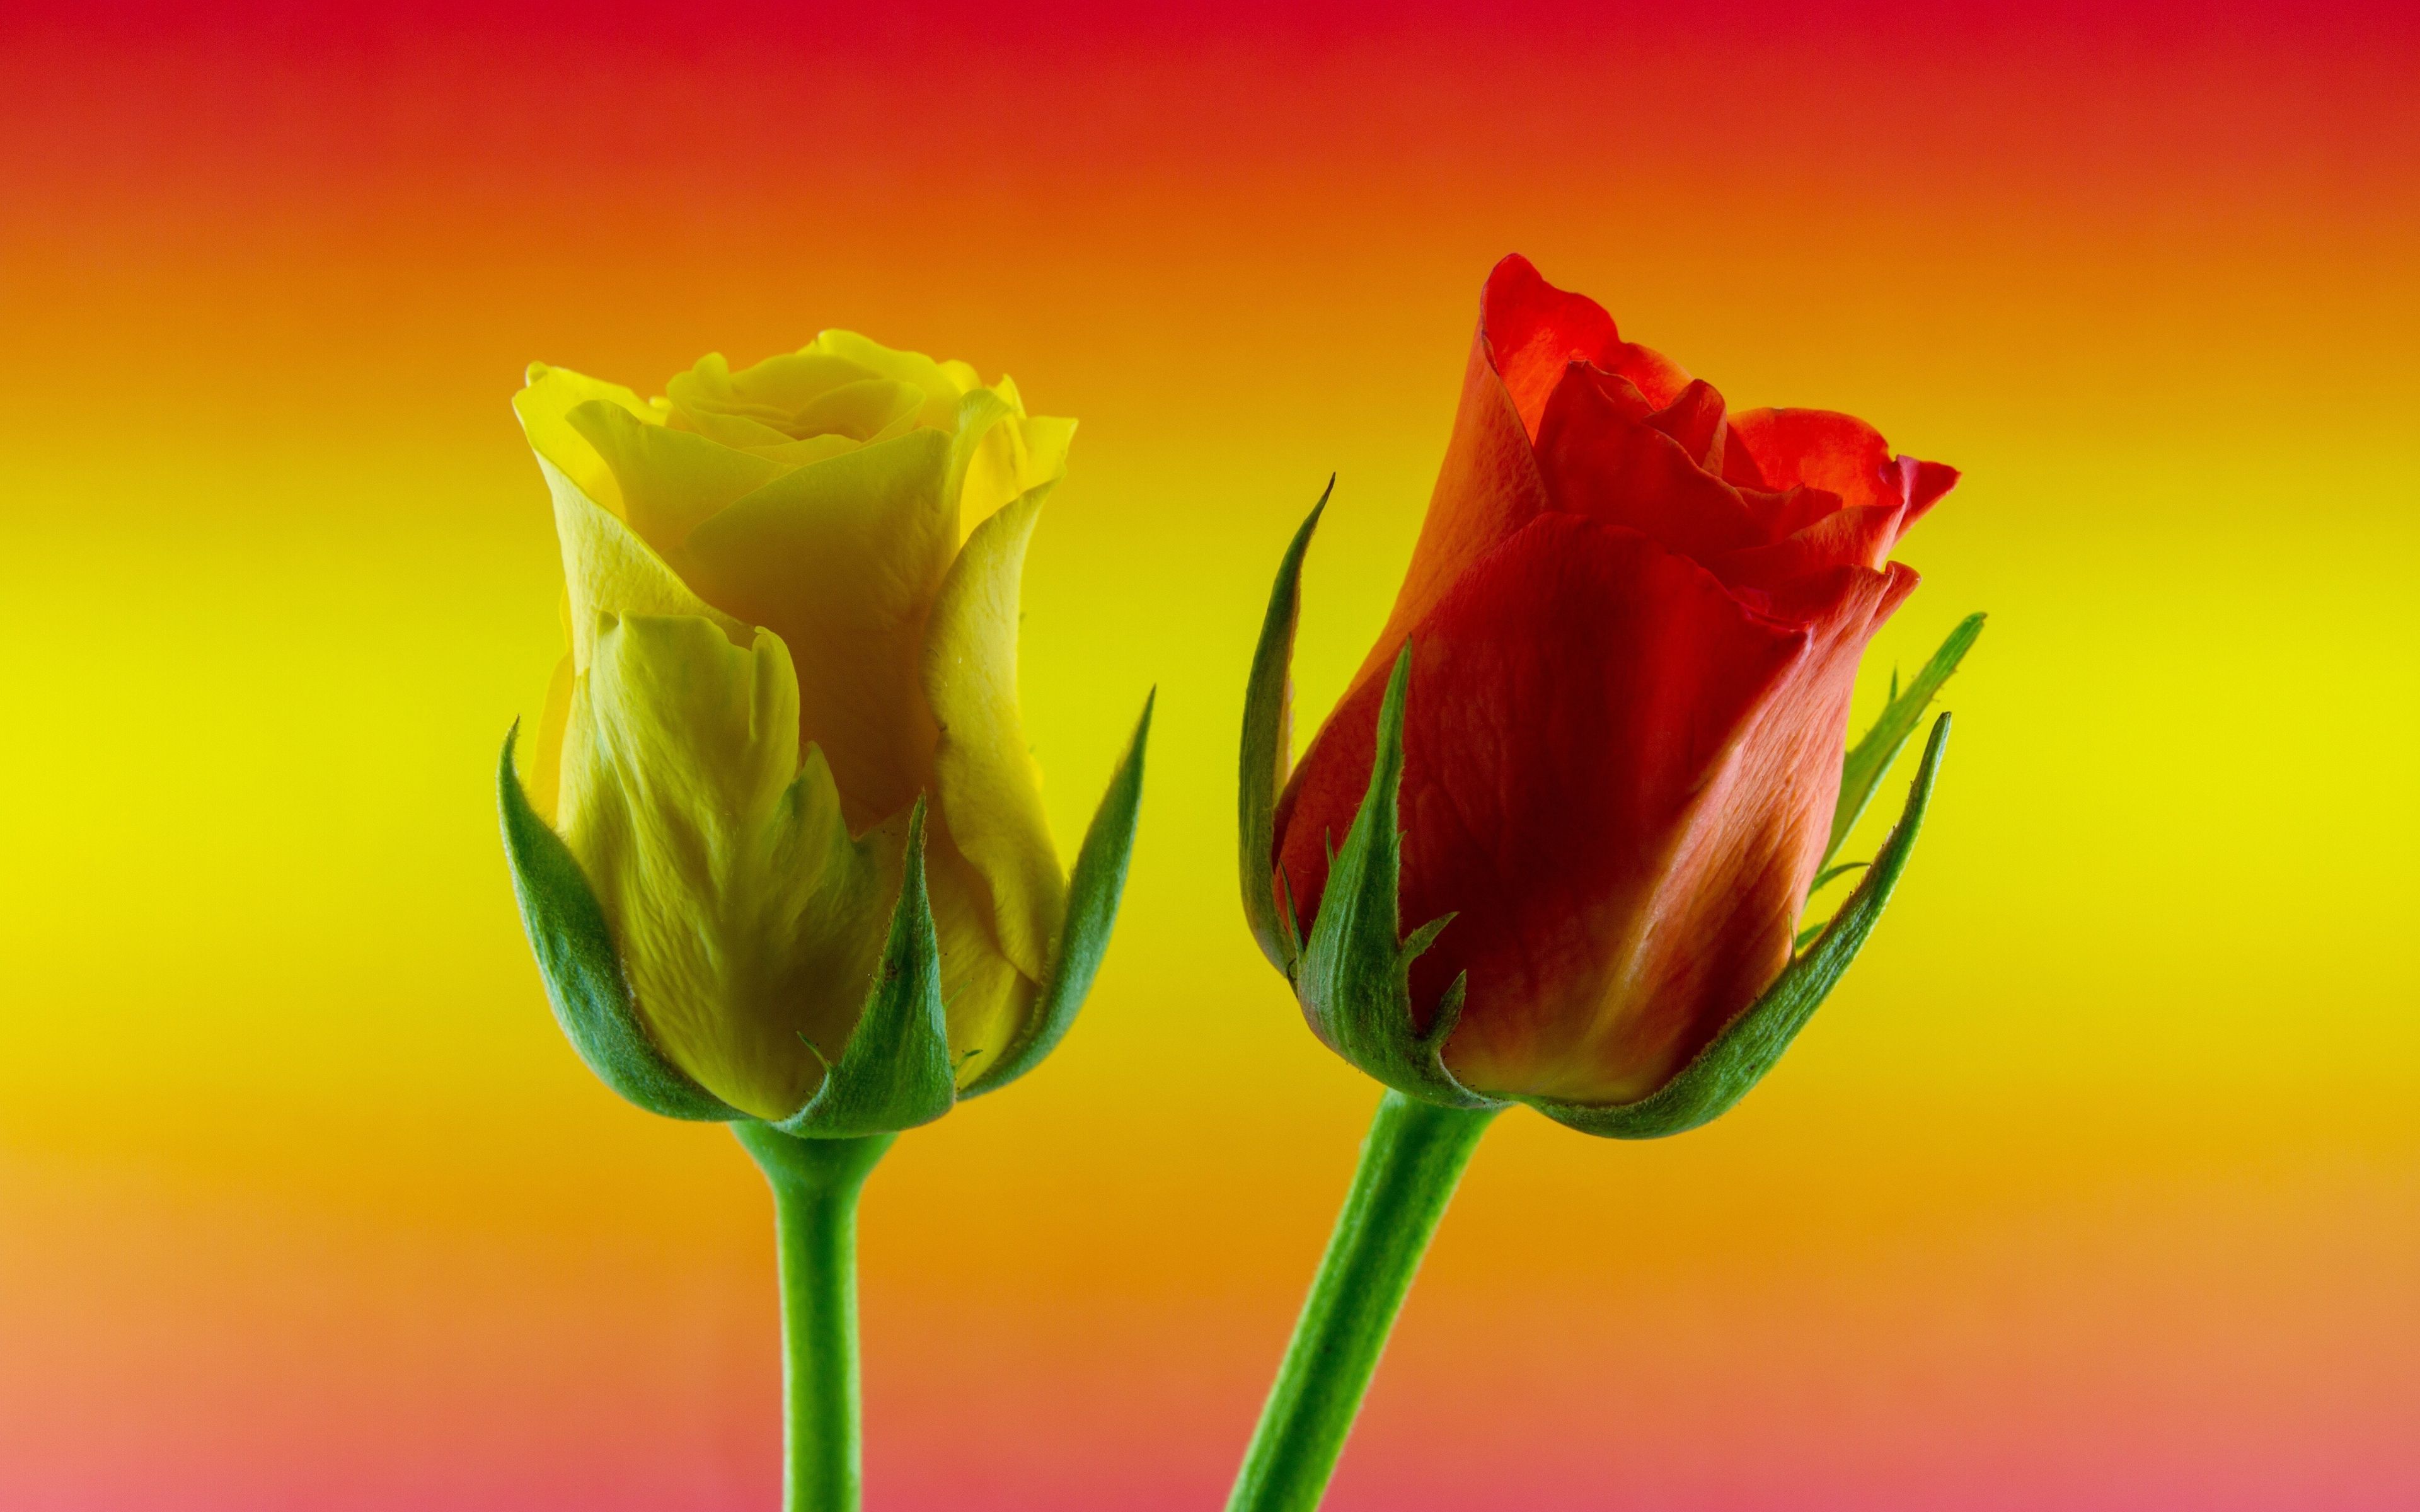 Download 3840x2400 wallpaper gradient, yellow red roses, flowers, 4k, ultra HD 16: widescreen, 3840x2400 HD image, background, 4643